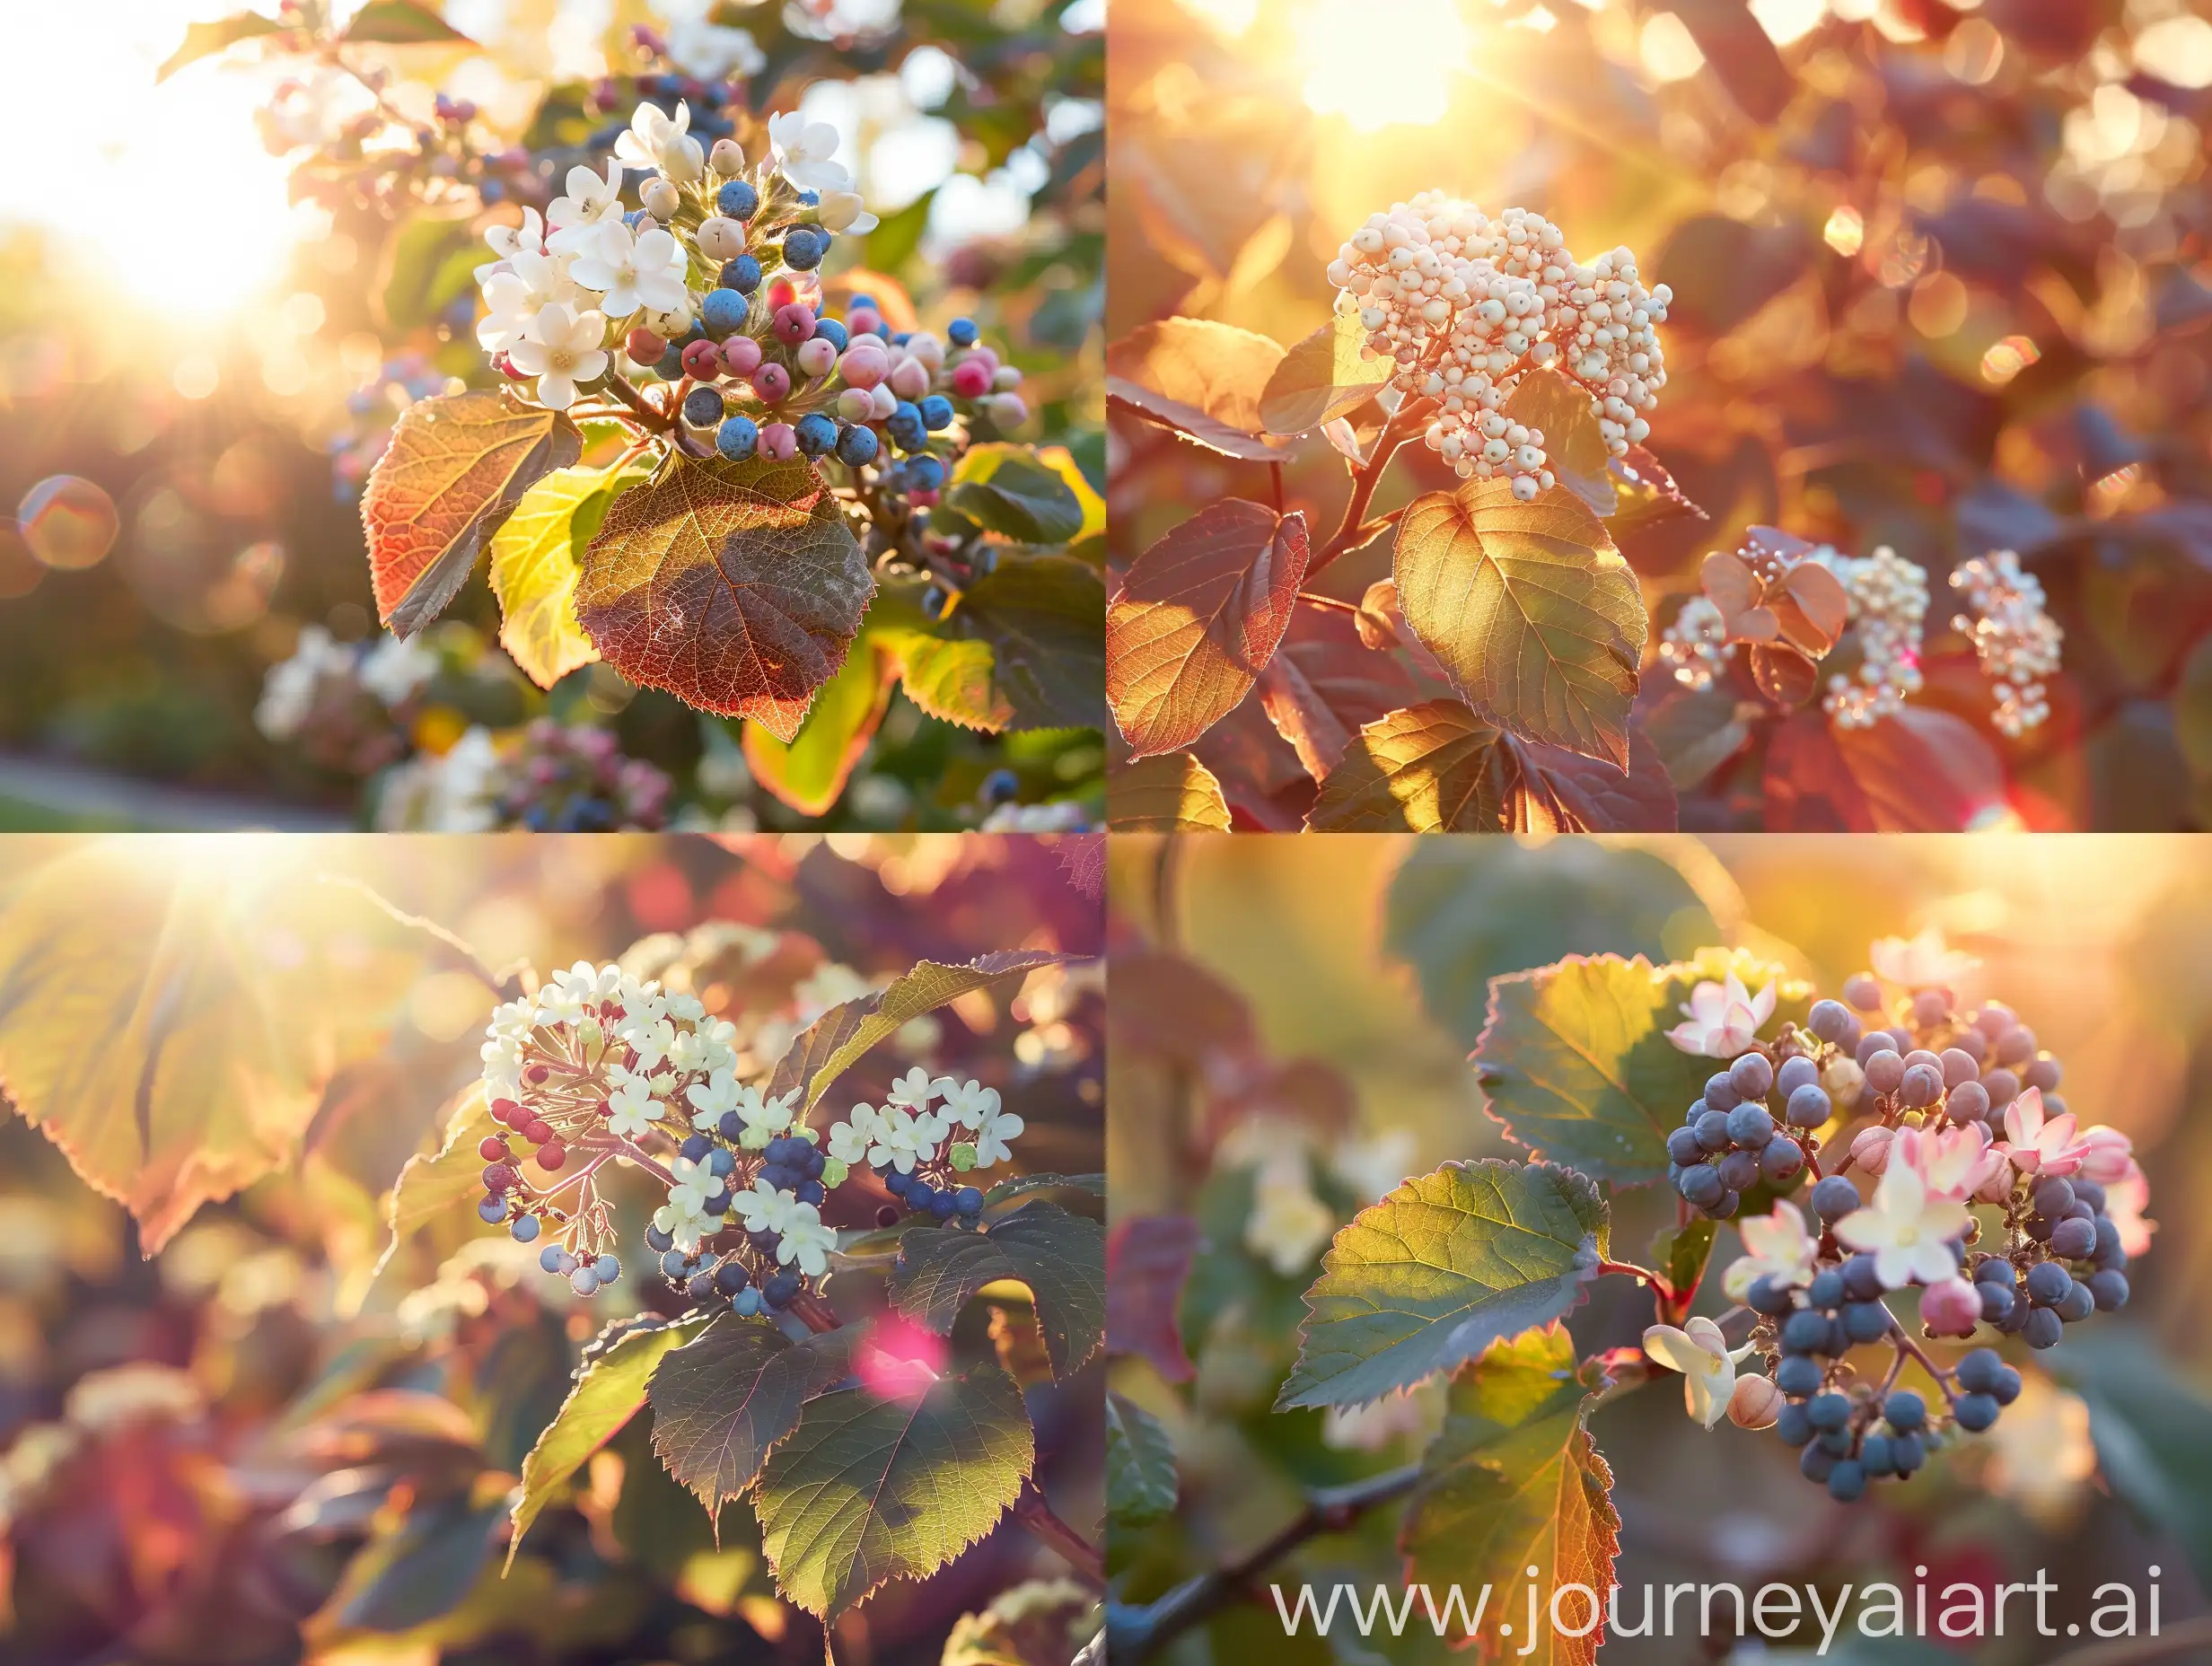 Close up high detailed photo capturing a Viburnum, Brandywine™. The sun, casting a warm, golden glow, bathes the scene in a serene ambiance, illuminating the intricate details of each element. The composition centers on a Viburnum, Brandywine™. Glossy green leaves turn wine-red in autumn. Clusters of pretty white flowers in spring form an eye-catching mix of pink and powder blue fruits in the fall. With bright ornamental berries, this native plant is very attractive to birds. Easy to grow in ful. The image evokes a sense of tranquility and natural beauty, inviting viewers to immerse themselves in the splendor of the landscape. --ar 16:9 